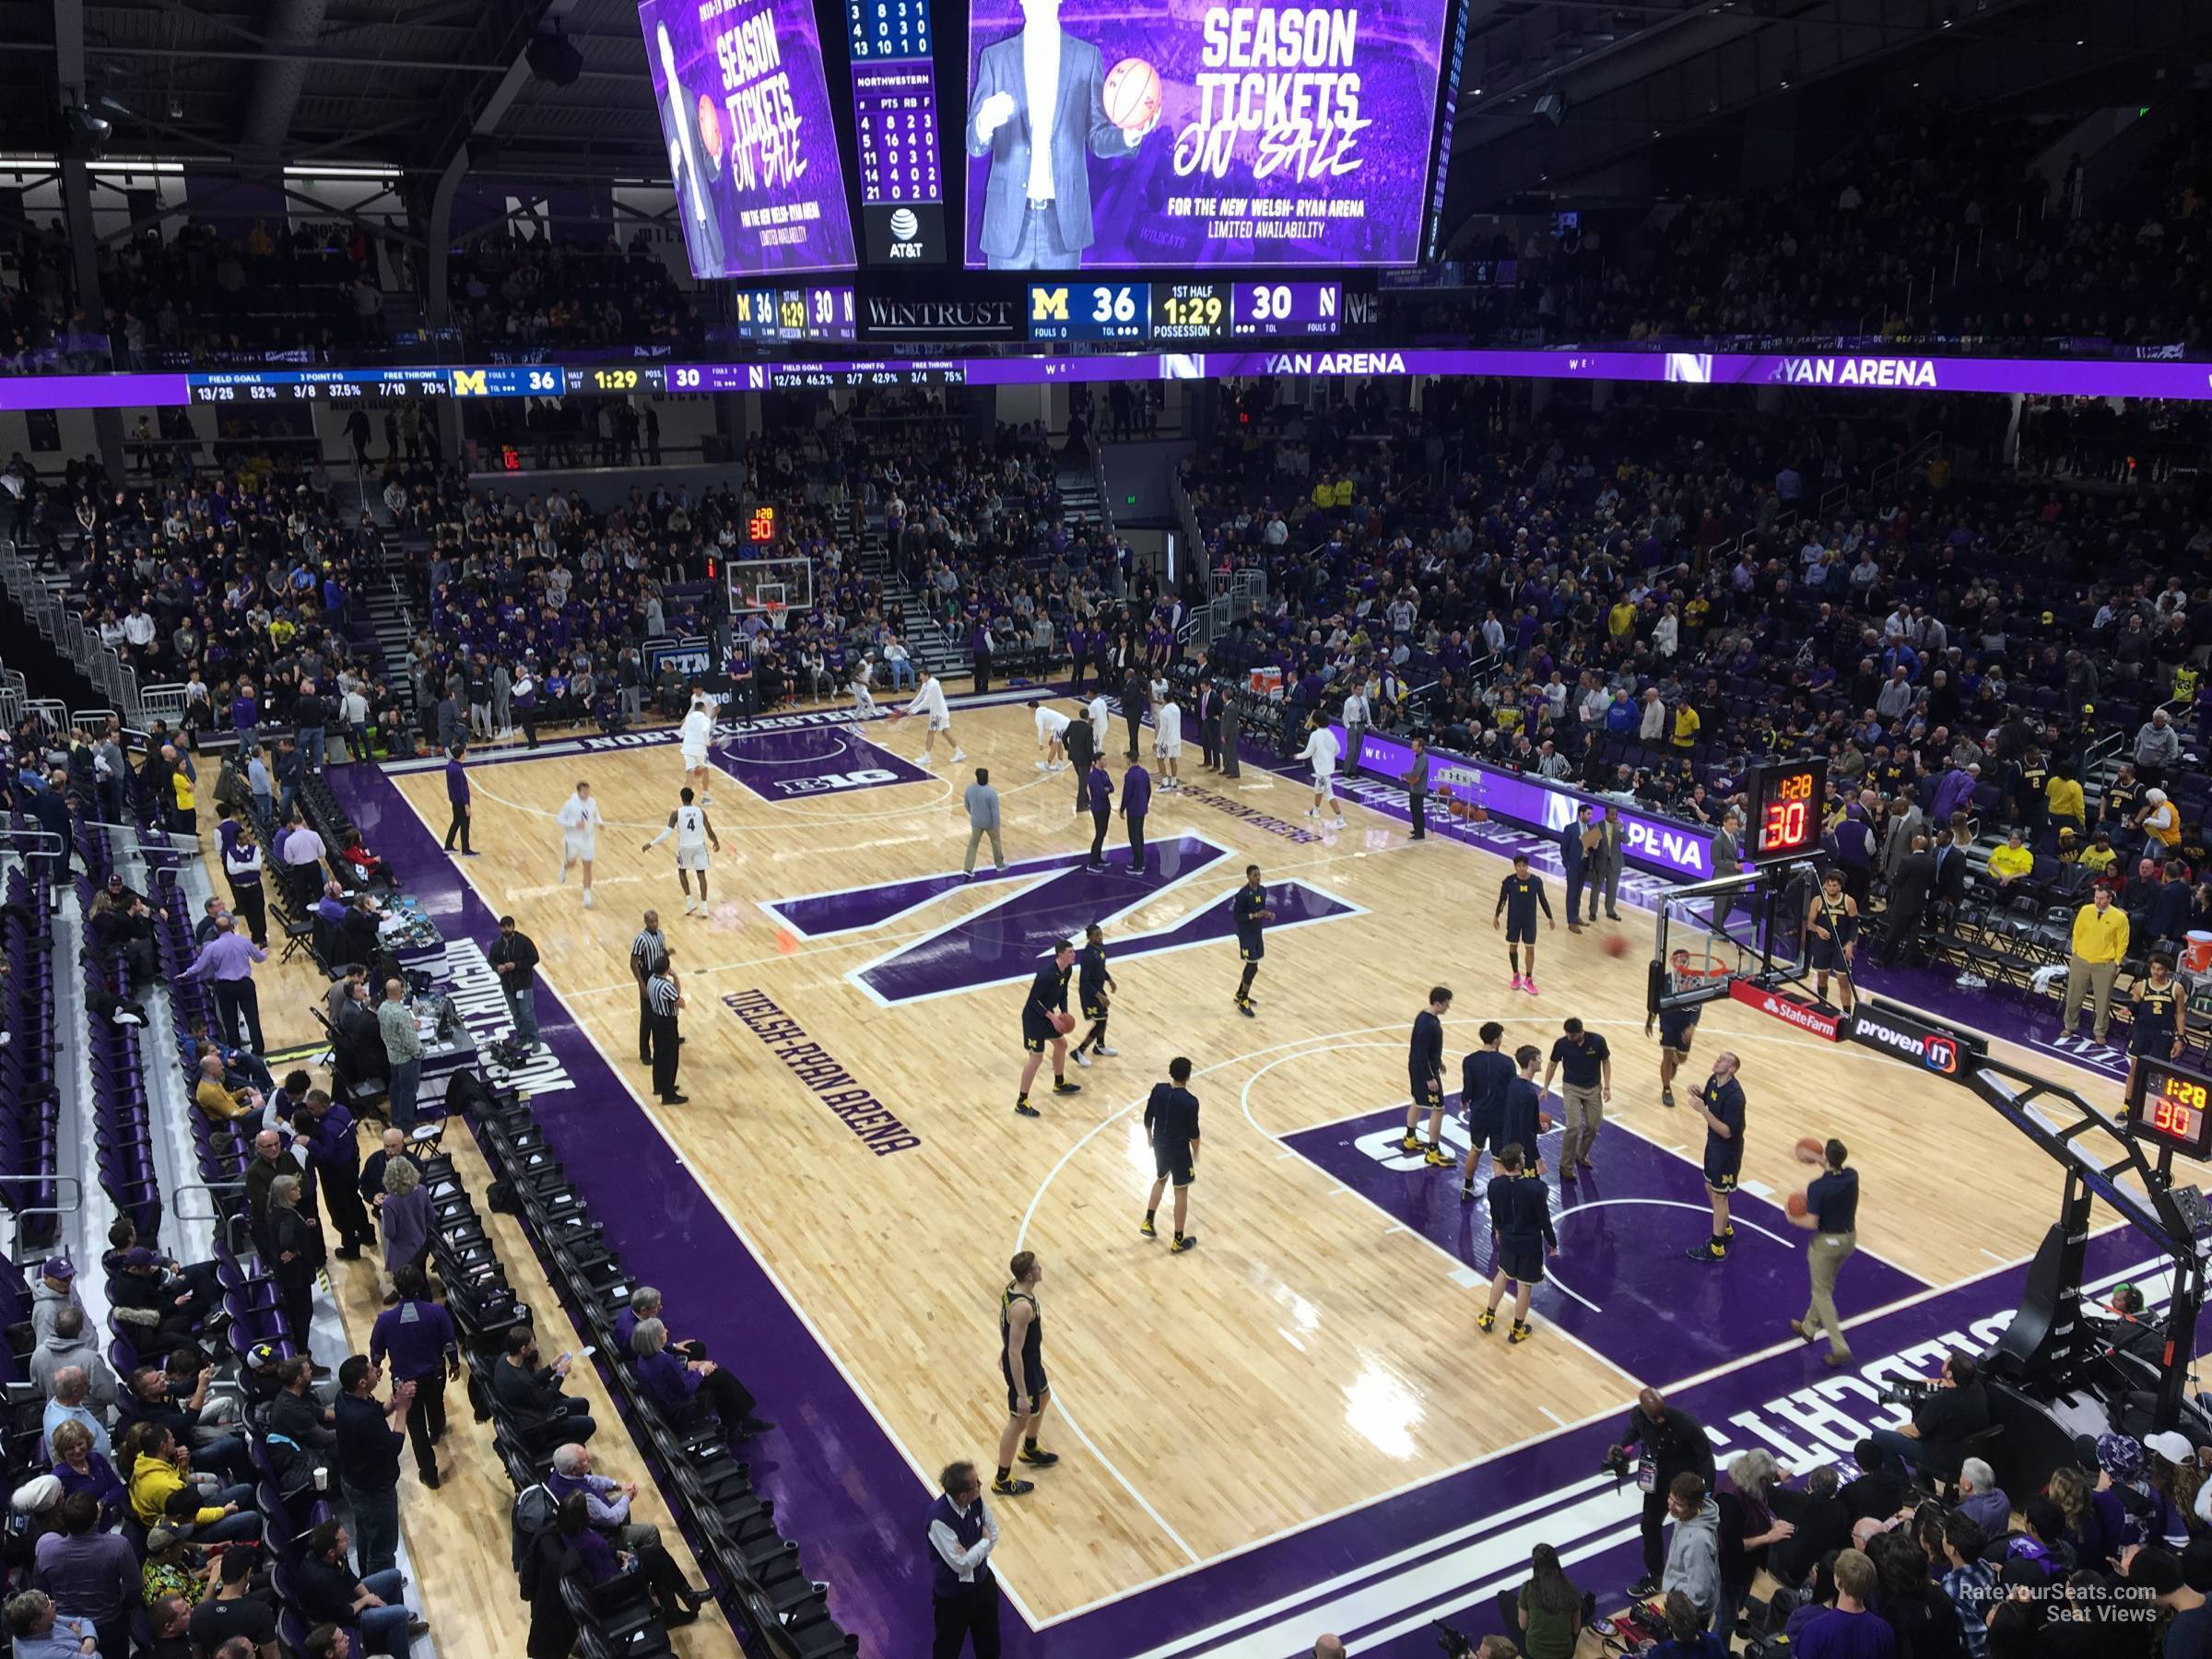 section 216, row 1 seat view  - welsh-ryan arena